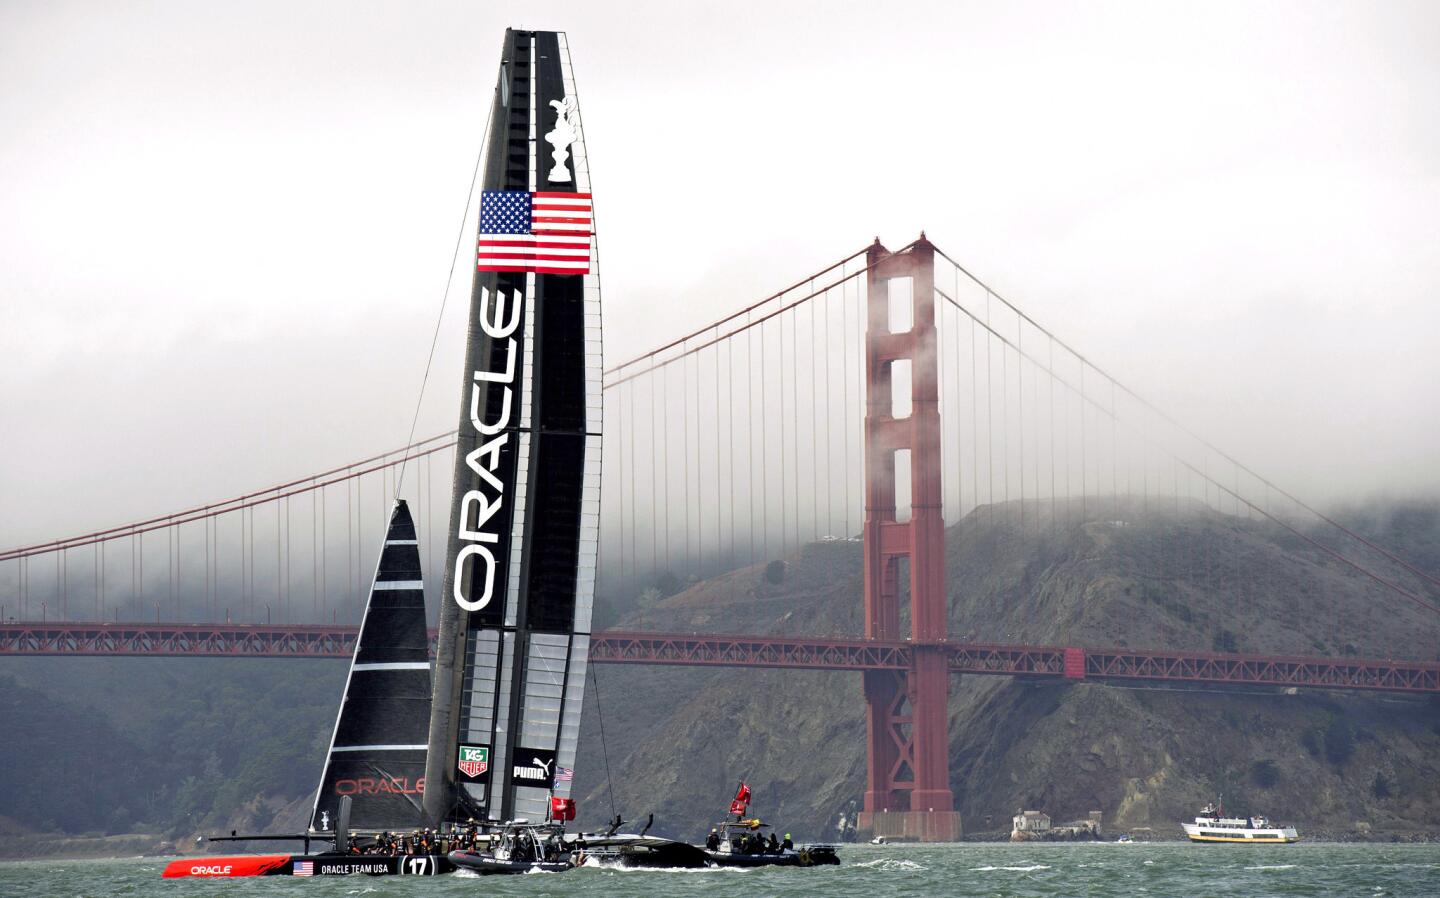 Images of America Cup Collection